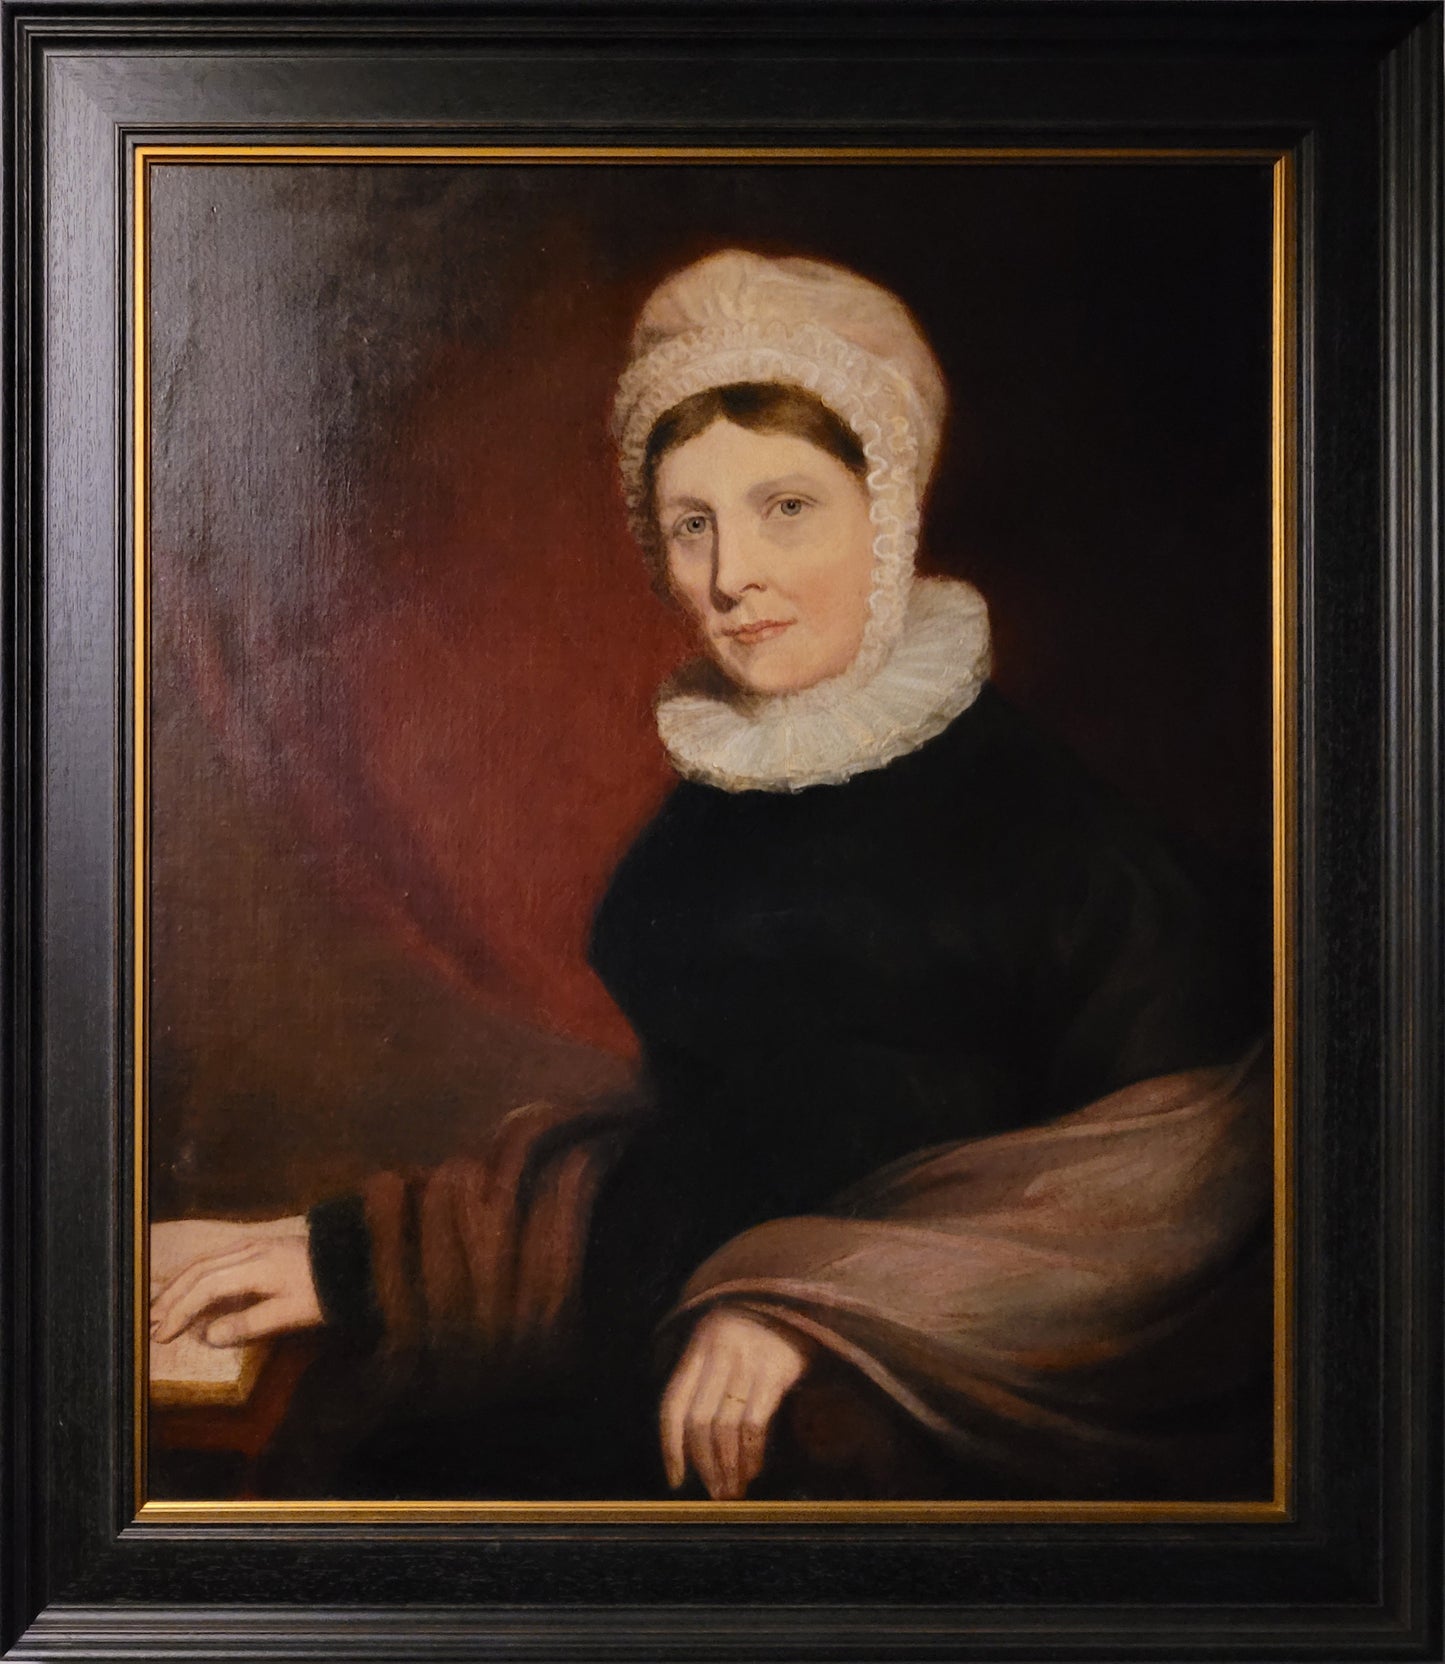 Portrait of a woman in ruffle and frilled cap